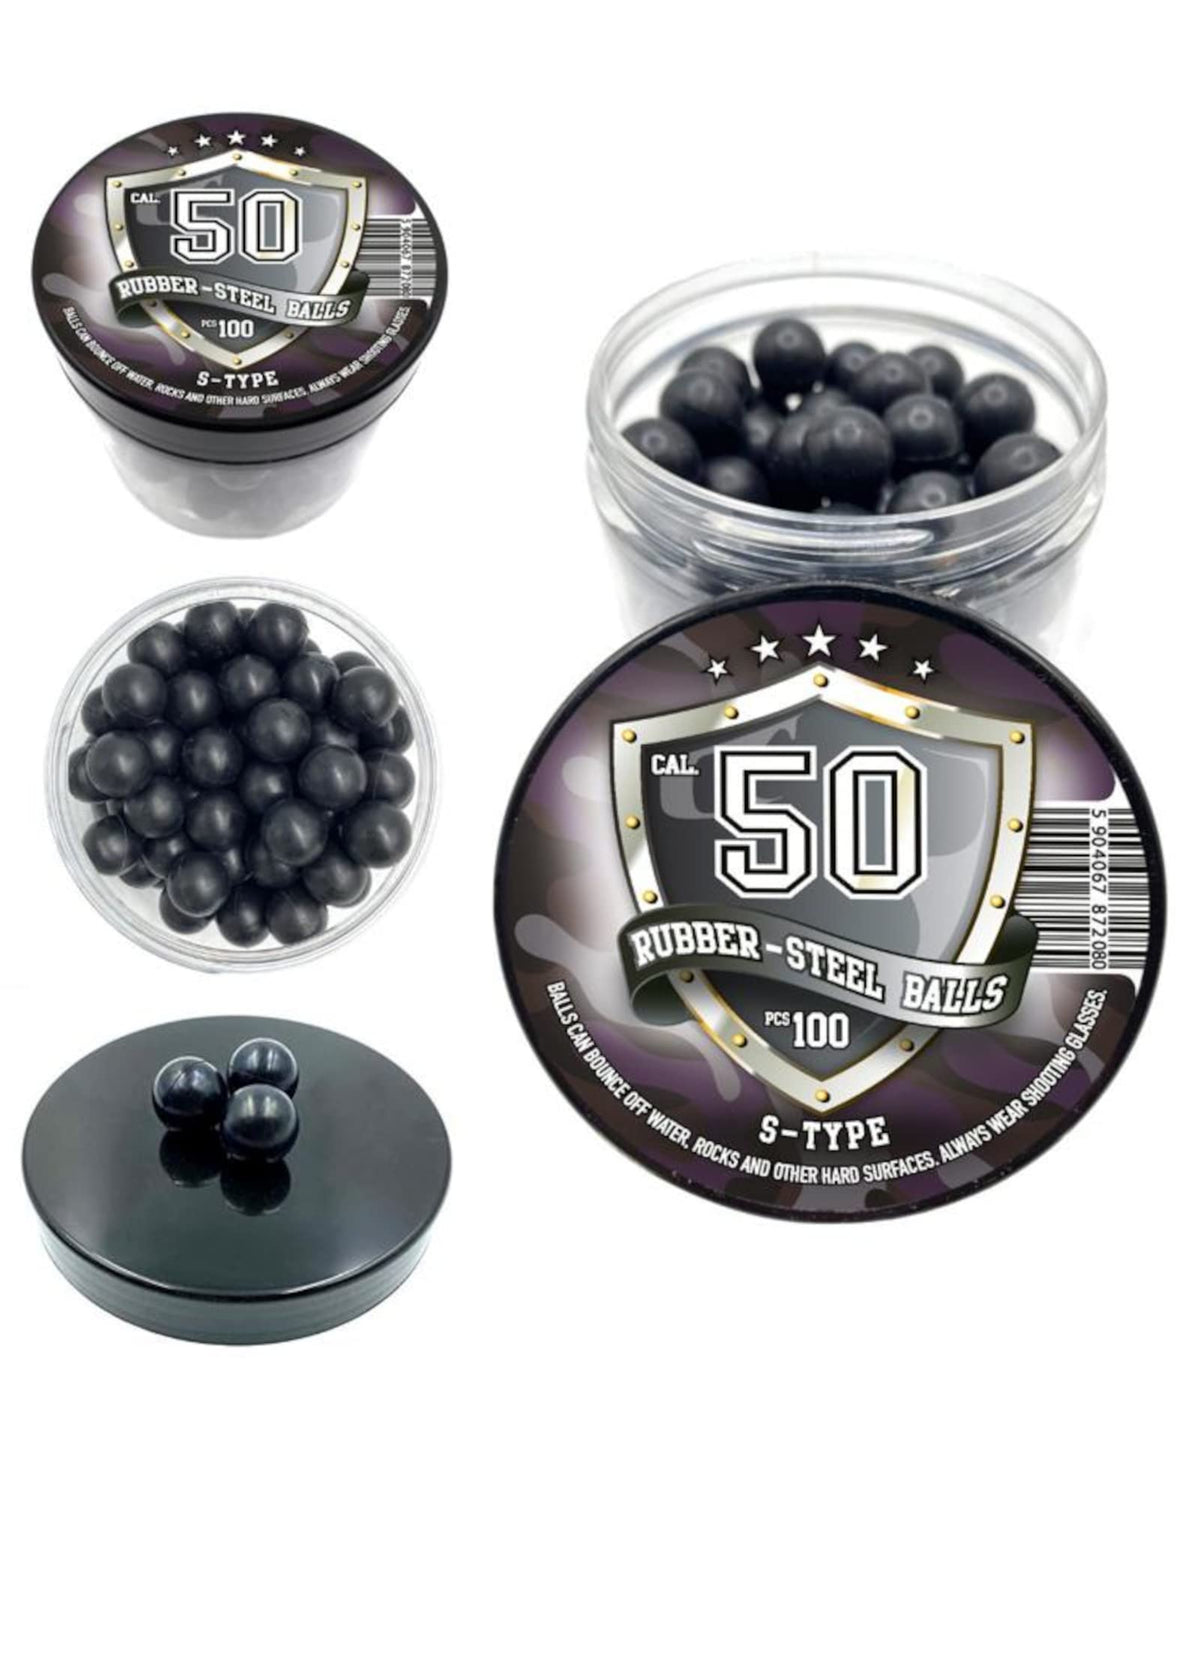 100 pcs. Premium Quality Hard Mix Rubber Steel Balls 2.7 Grams Heavy Reusable Ammo Projectiles Paintballs Reballs Powerballs for Shooting Training Home and Self Defense Pistols in 50 Caliber (S-TYPE)